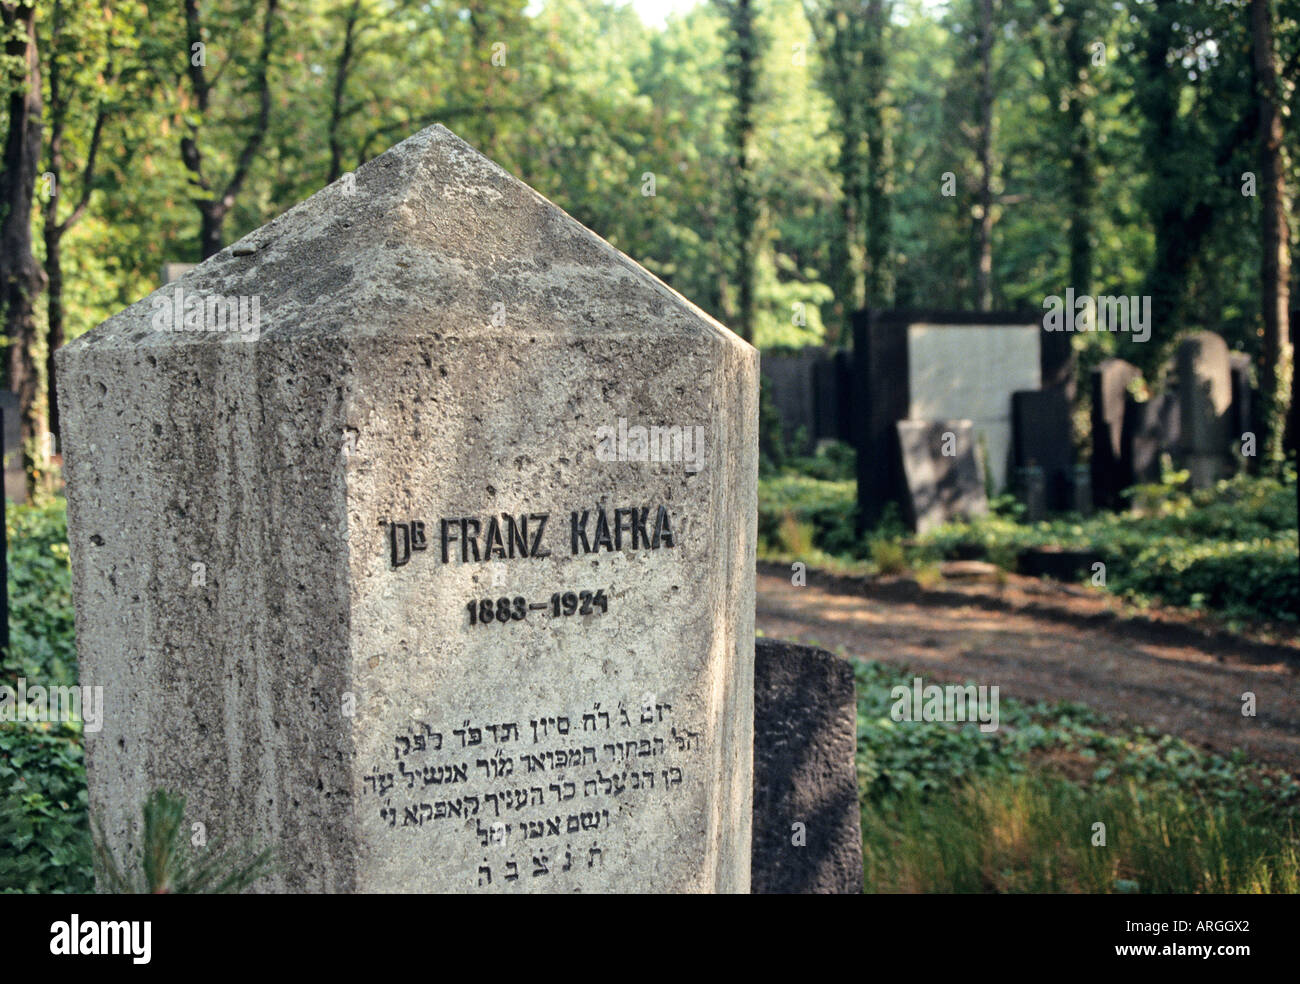 Detail of the inscription on the stone marking the burial place of the author Franz Kafka 1883 1924 and his parents in the wooded surroundings of the New Jewish Cemetery Prague Stock Photo